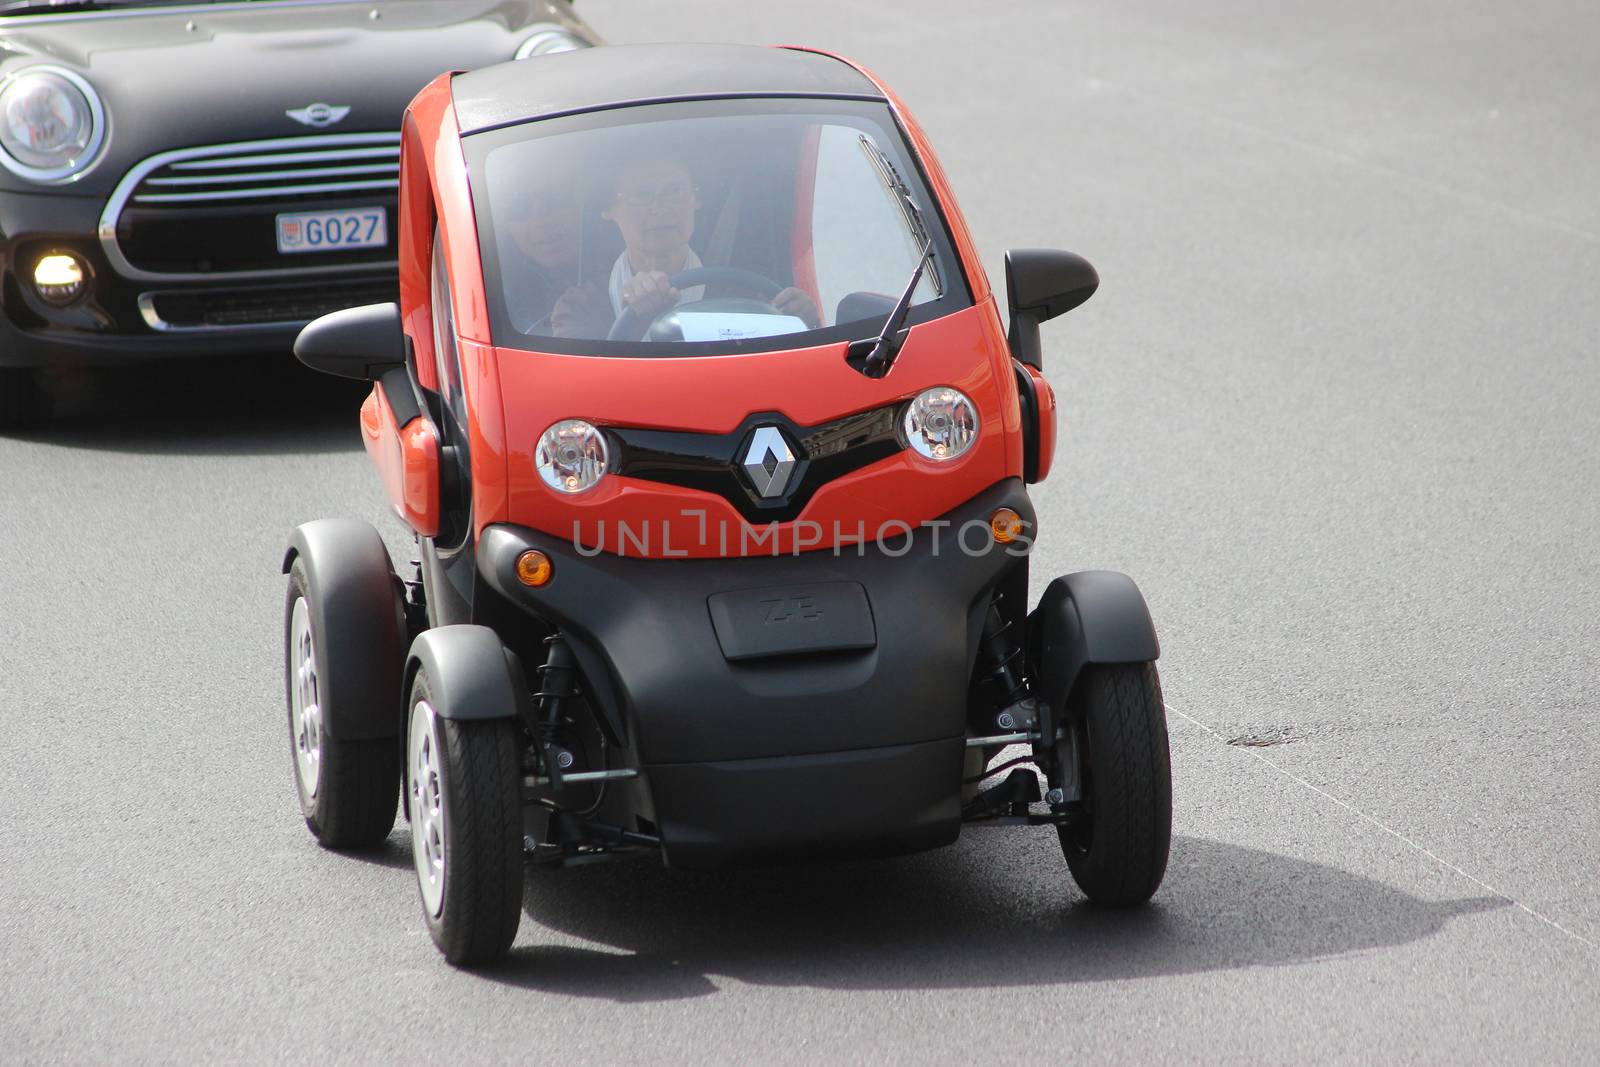 Monte-Carlo, Monaco - April 6, 2016: Red Electric Car Renault Twizy on Avenue d'Ostende in Monaco. Old Woman Driving an Electric Car Renault Twizy in the south of France